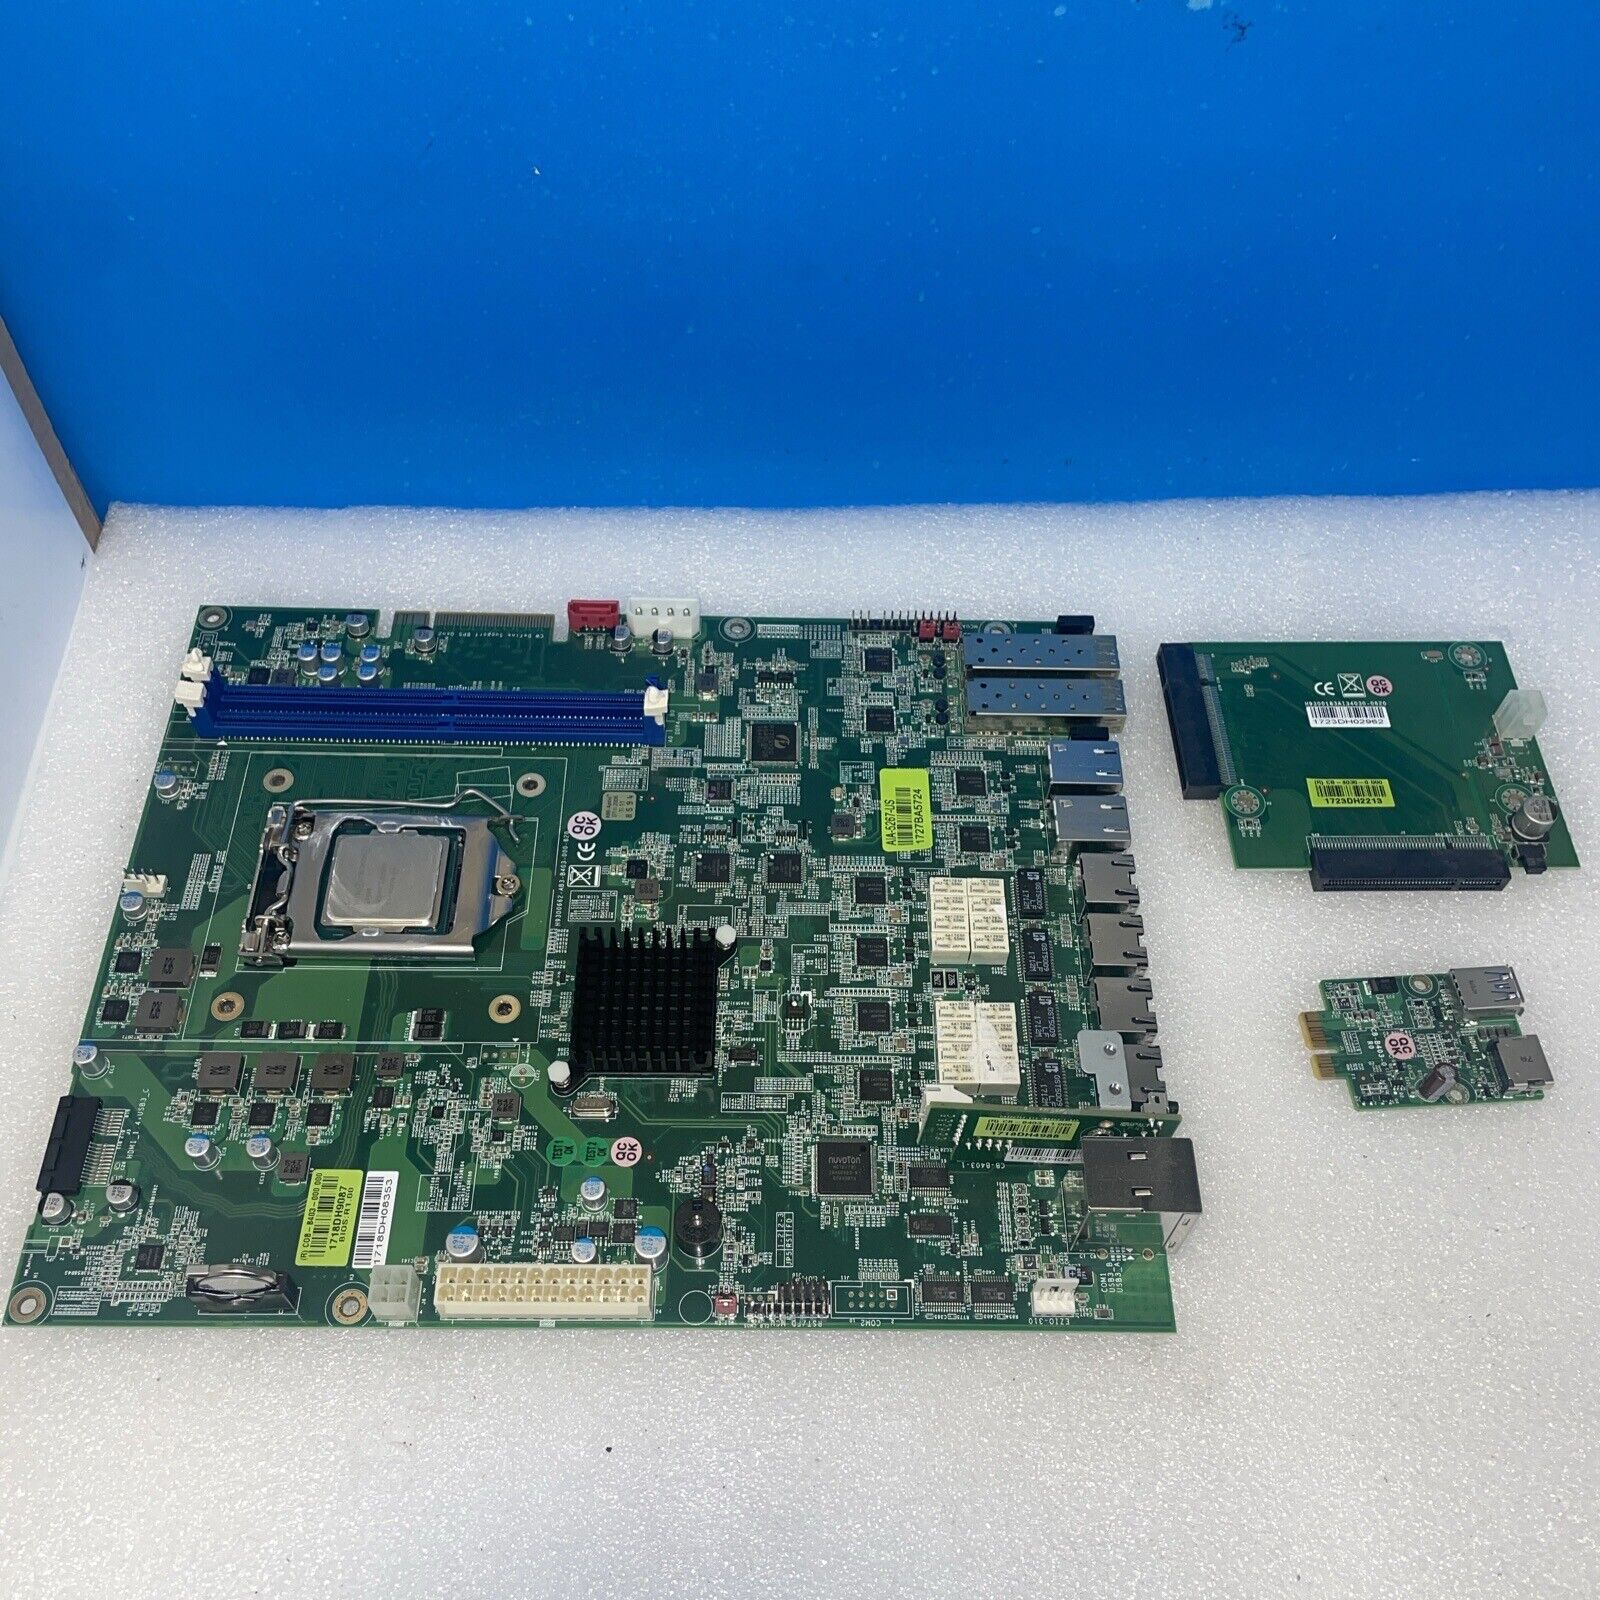 Mainboard for Sophos SG 210 Rev.3 Network Firewall Security Appliance